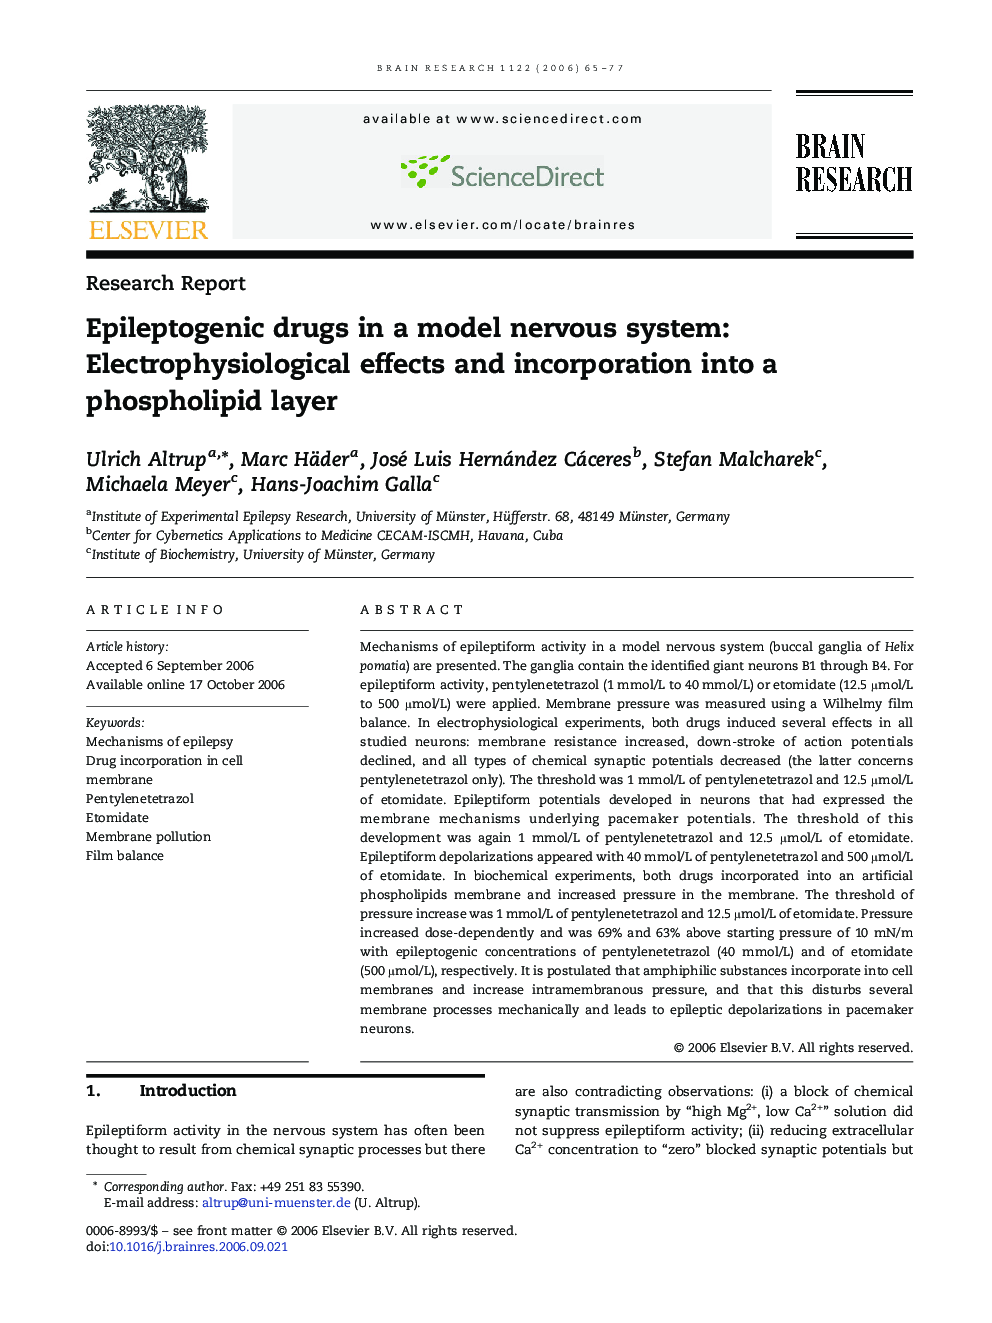 Epileptogenic drugs in a model nervous system: Electrophysiological effects and incorporation into a phospholipid layer